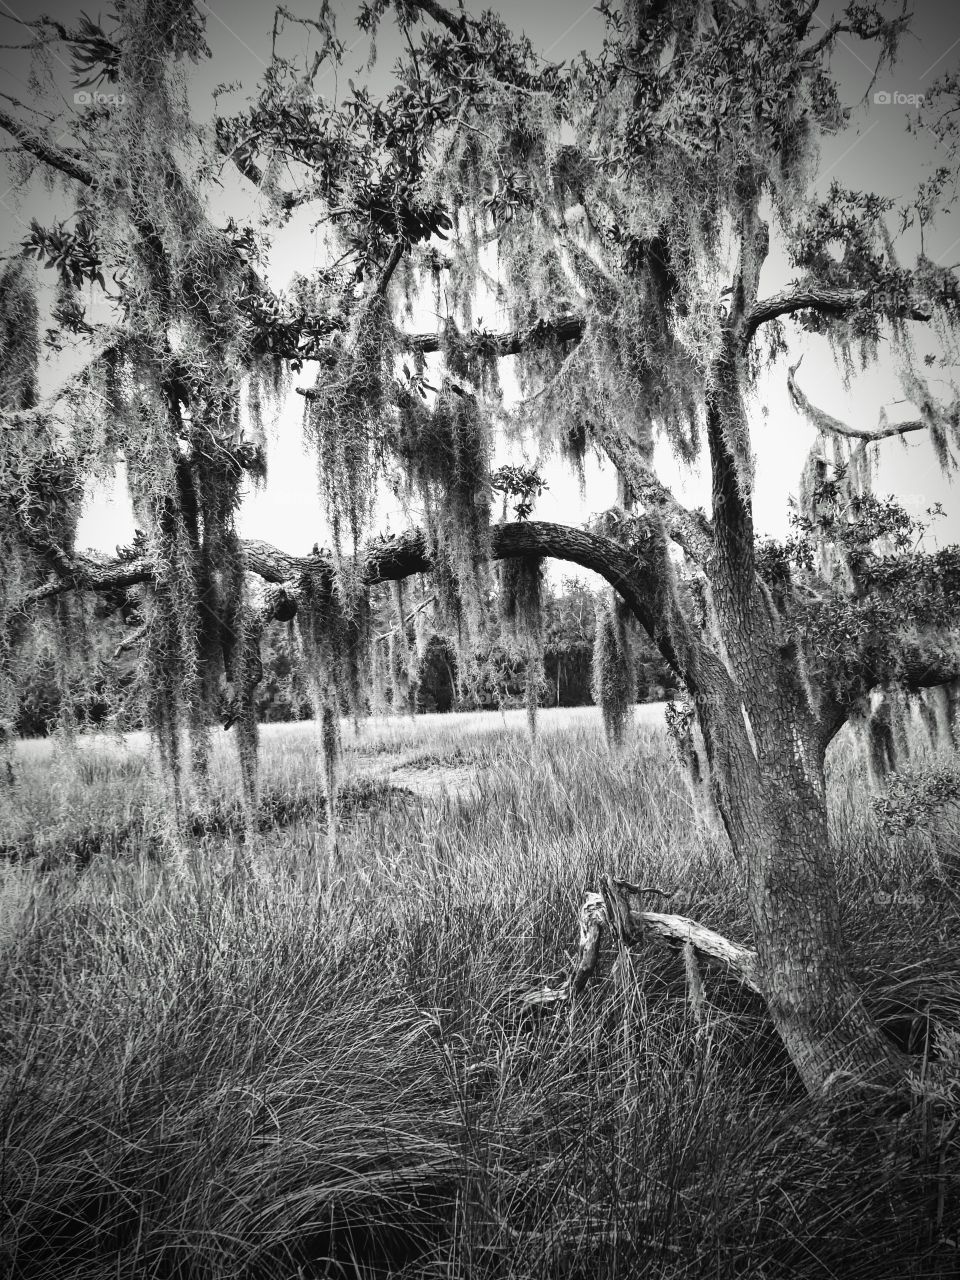 beautiful, old tree covered in Spanish moss